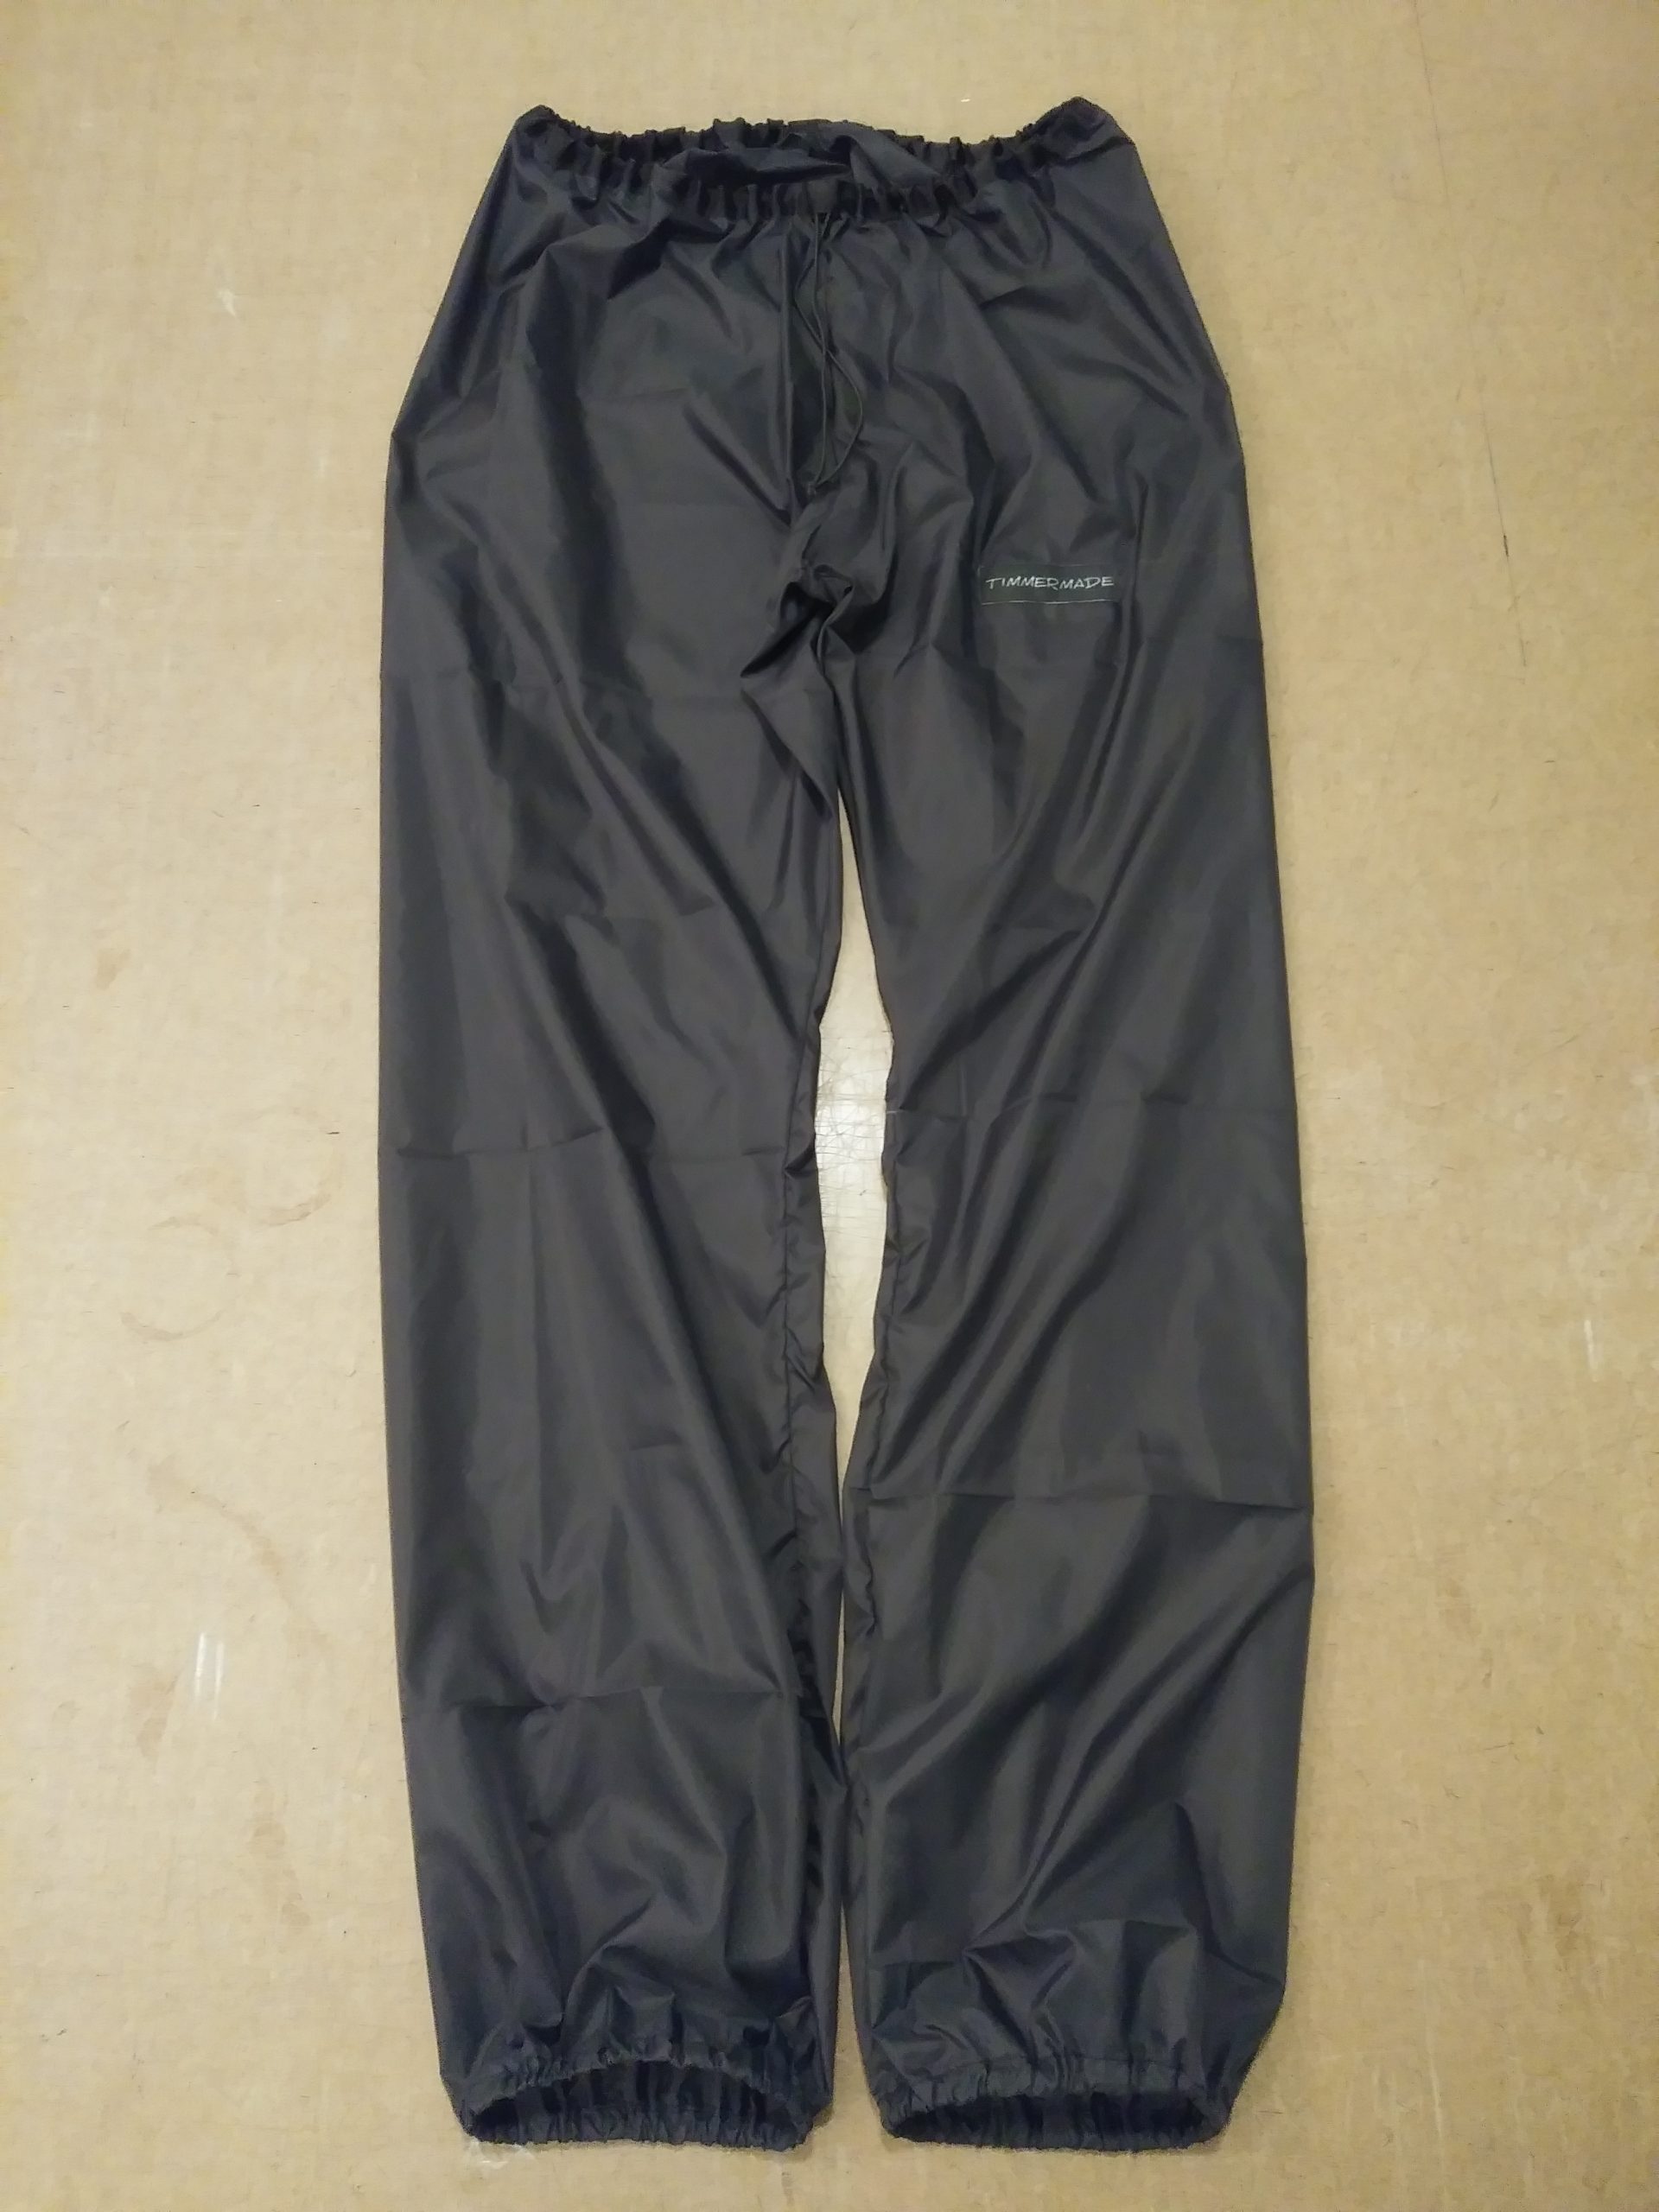 Under Armour Mens Small Wind Pants Black Loose Fit Ankle Zip Drawstring